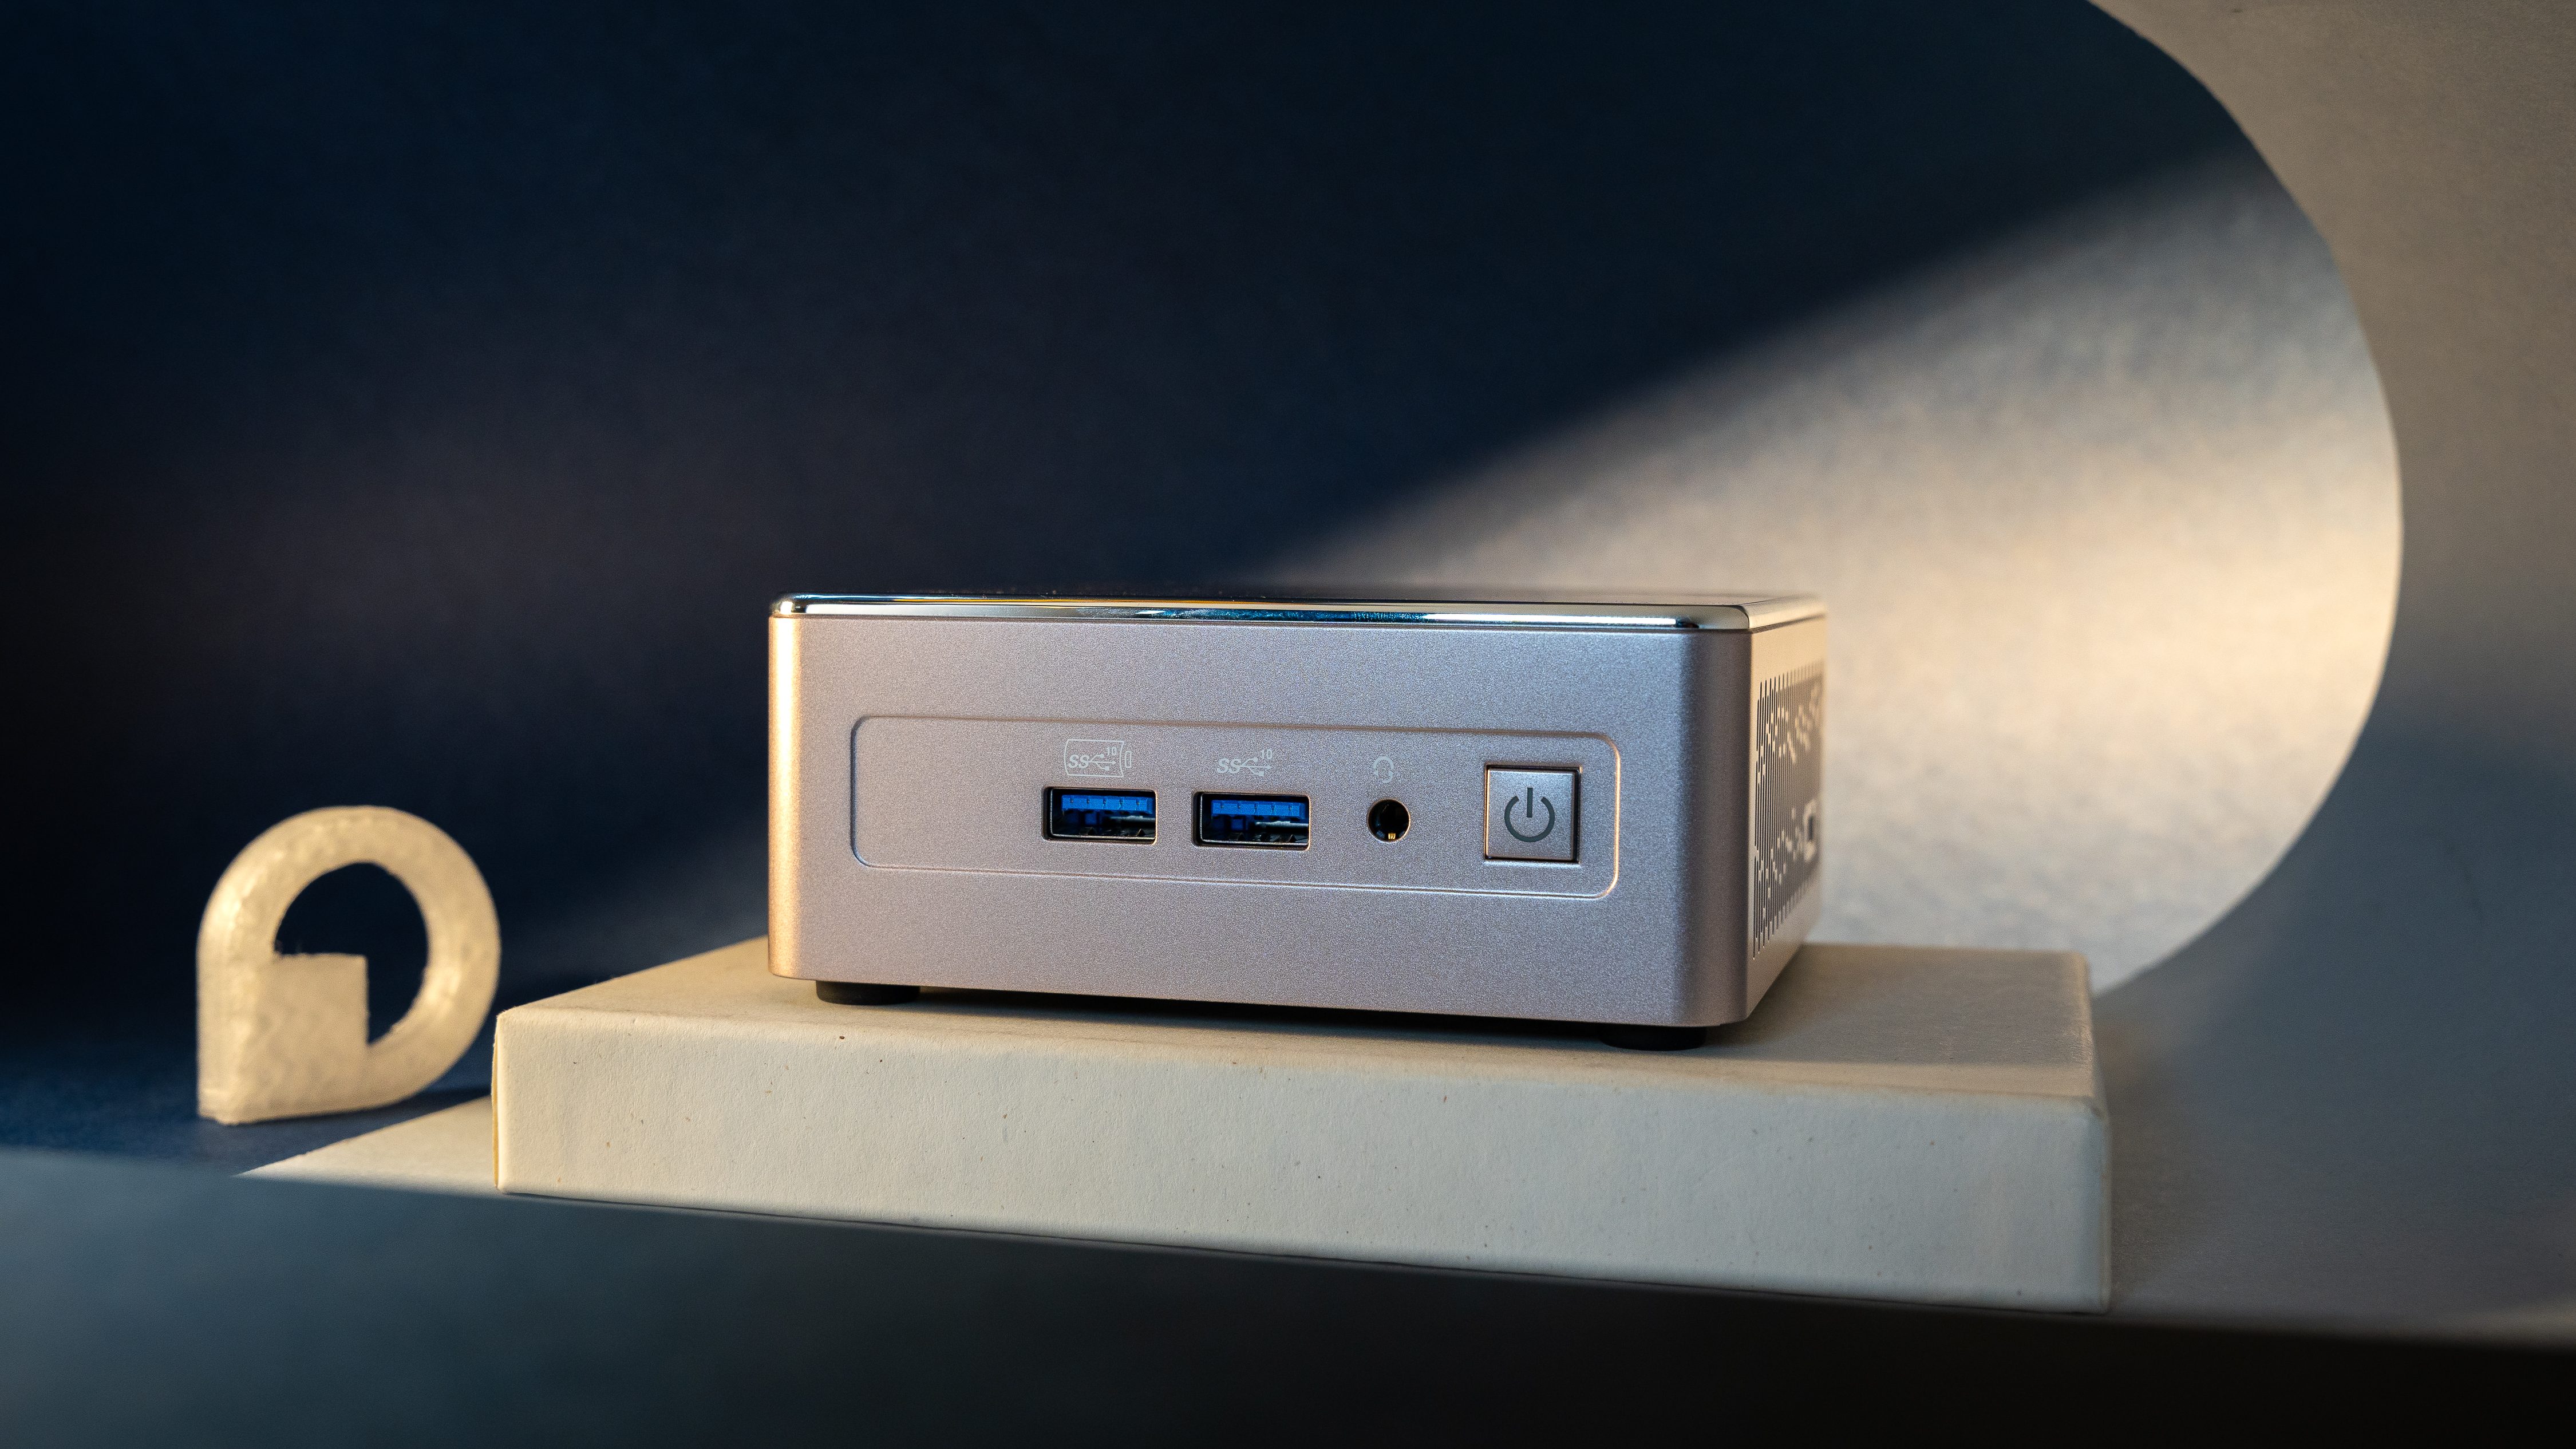 GEEKOM launches AS 6 and AS 5 AMD-based mini-PCs